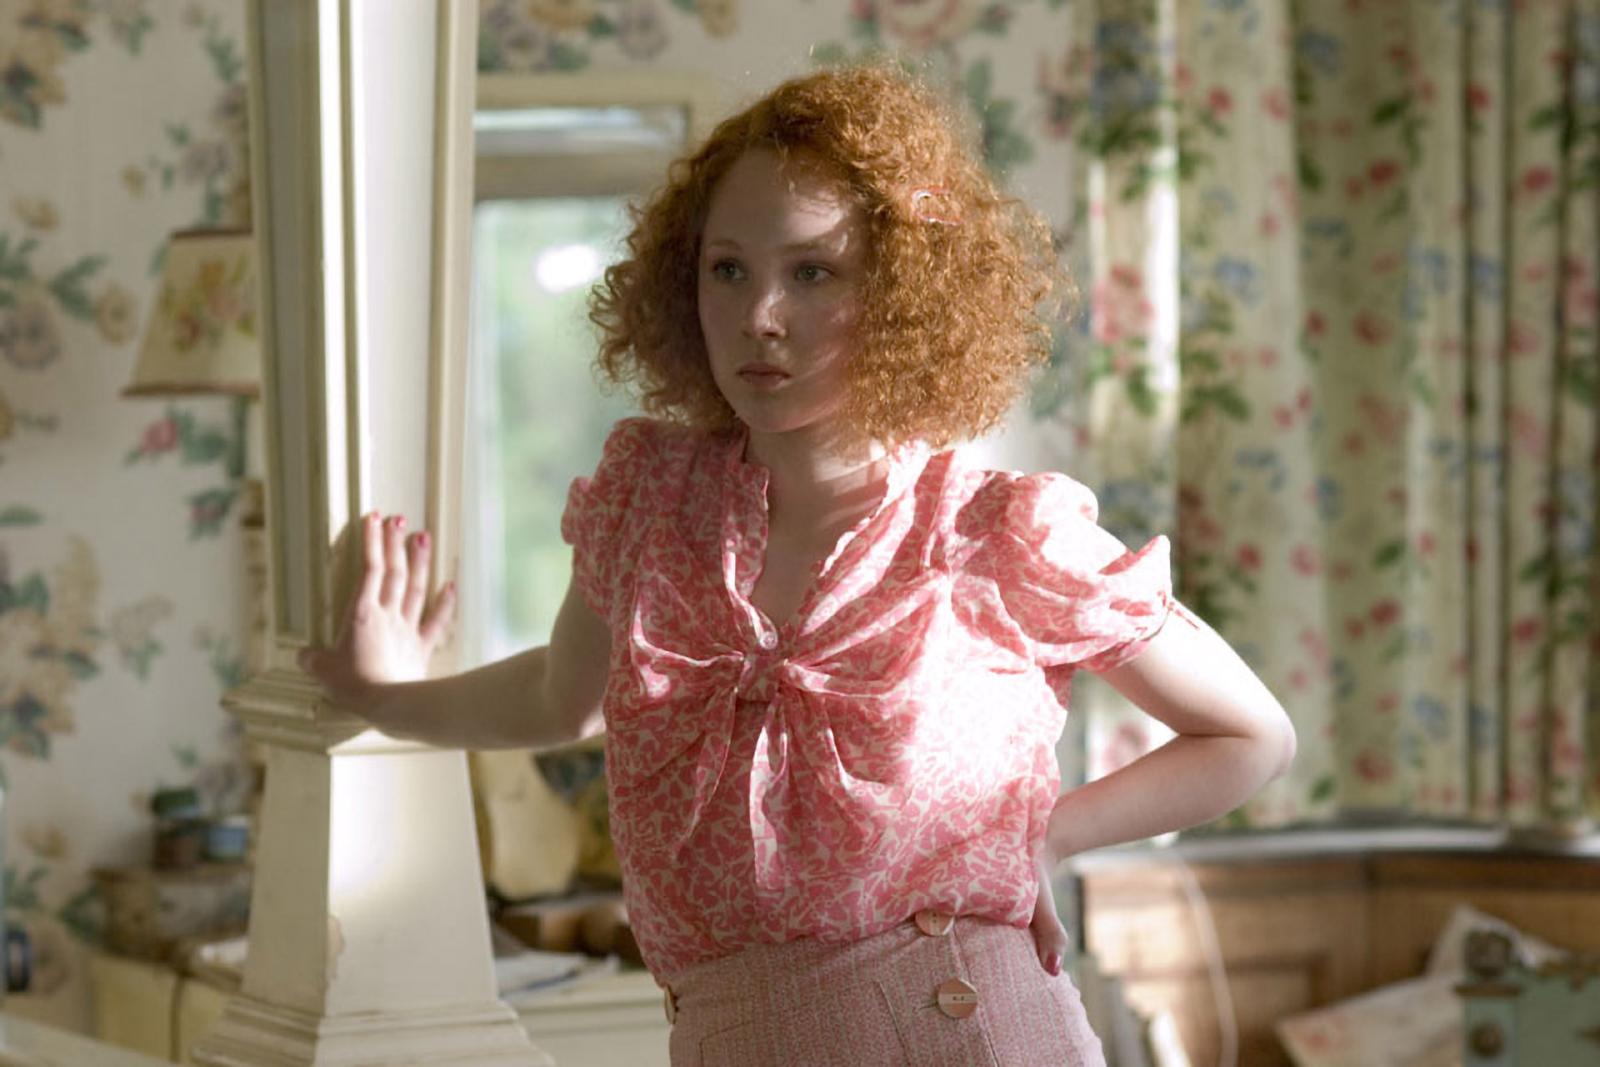 5 Stellar Juno Temple Roles for Your Post-Lasso Blues - image 4